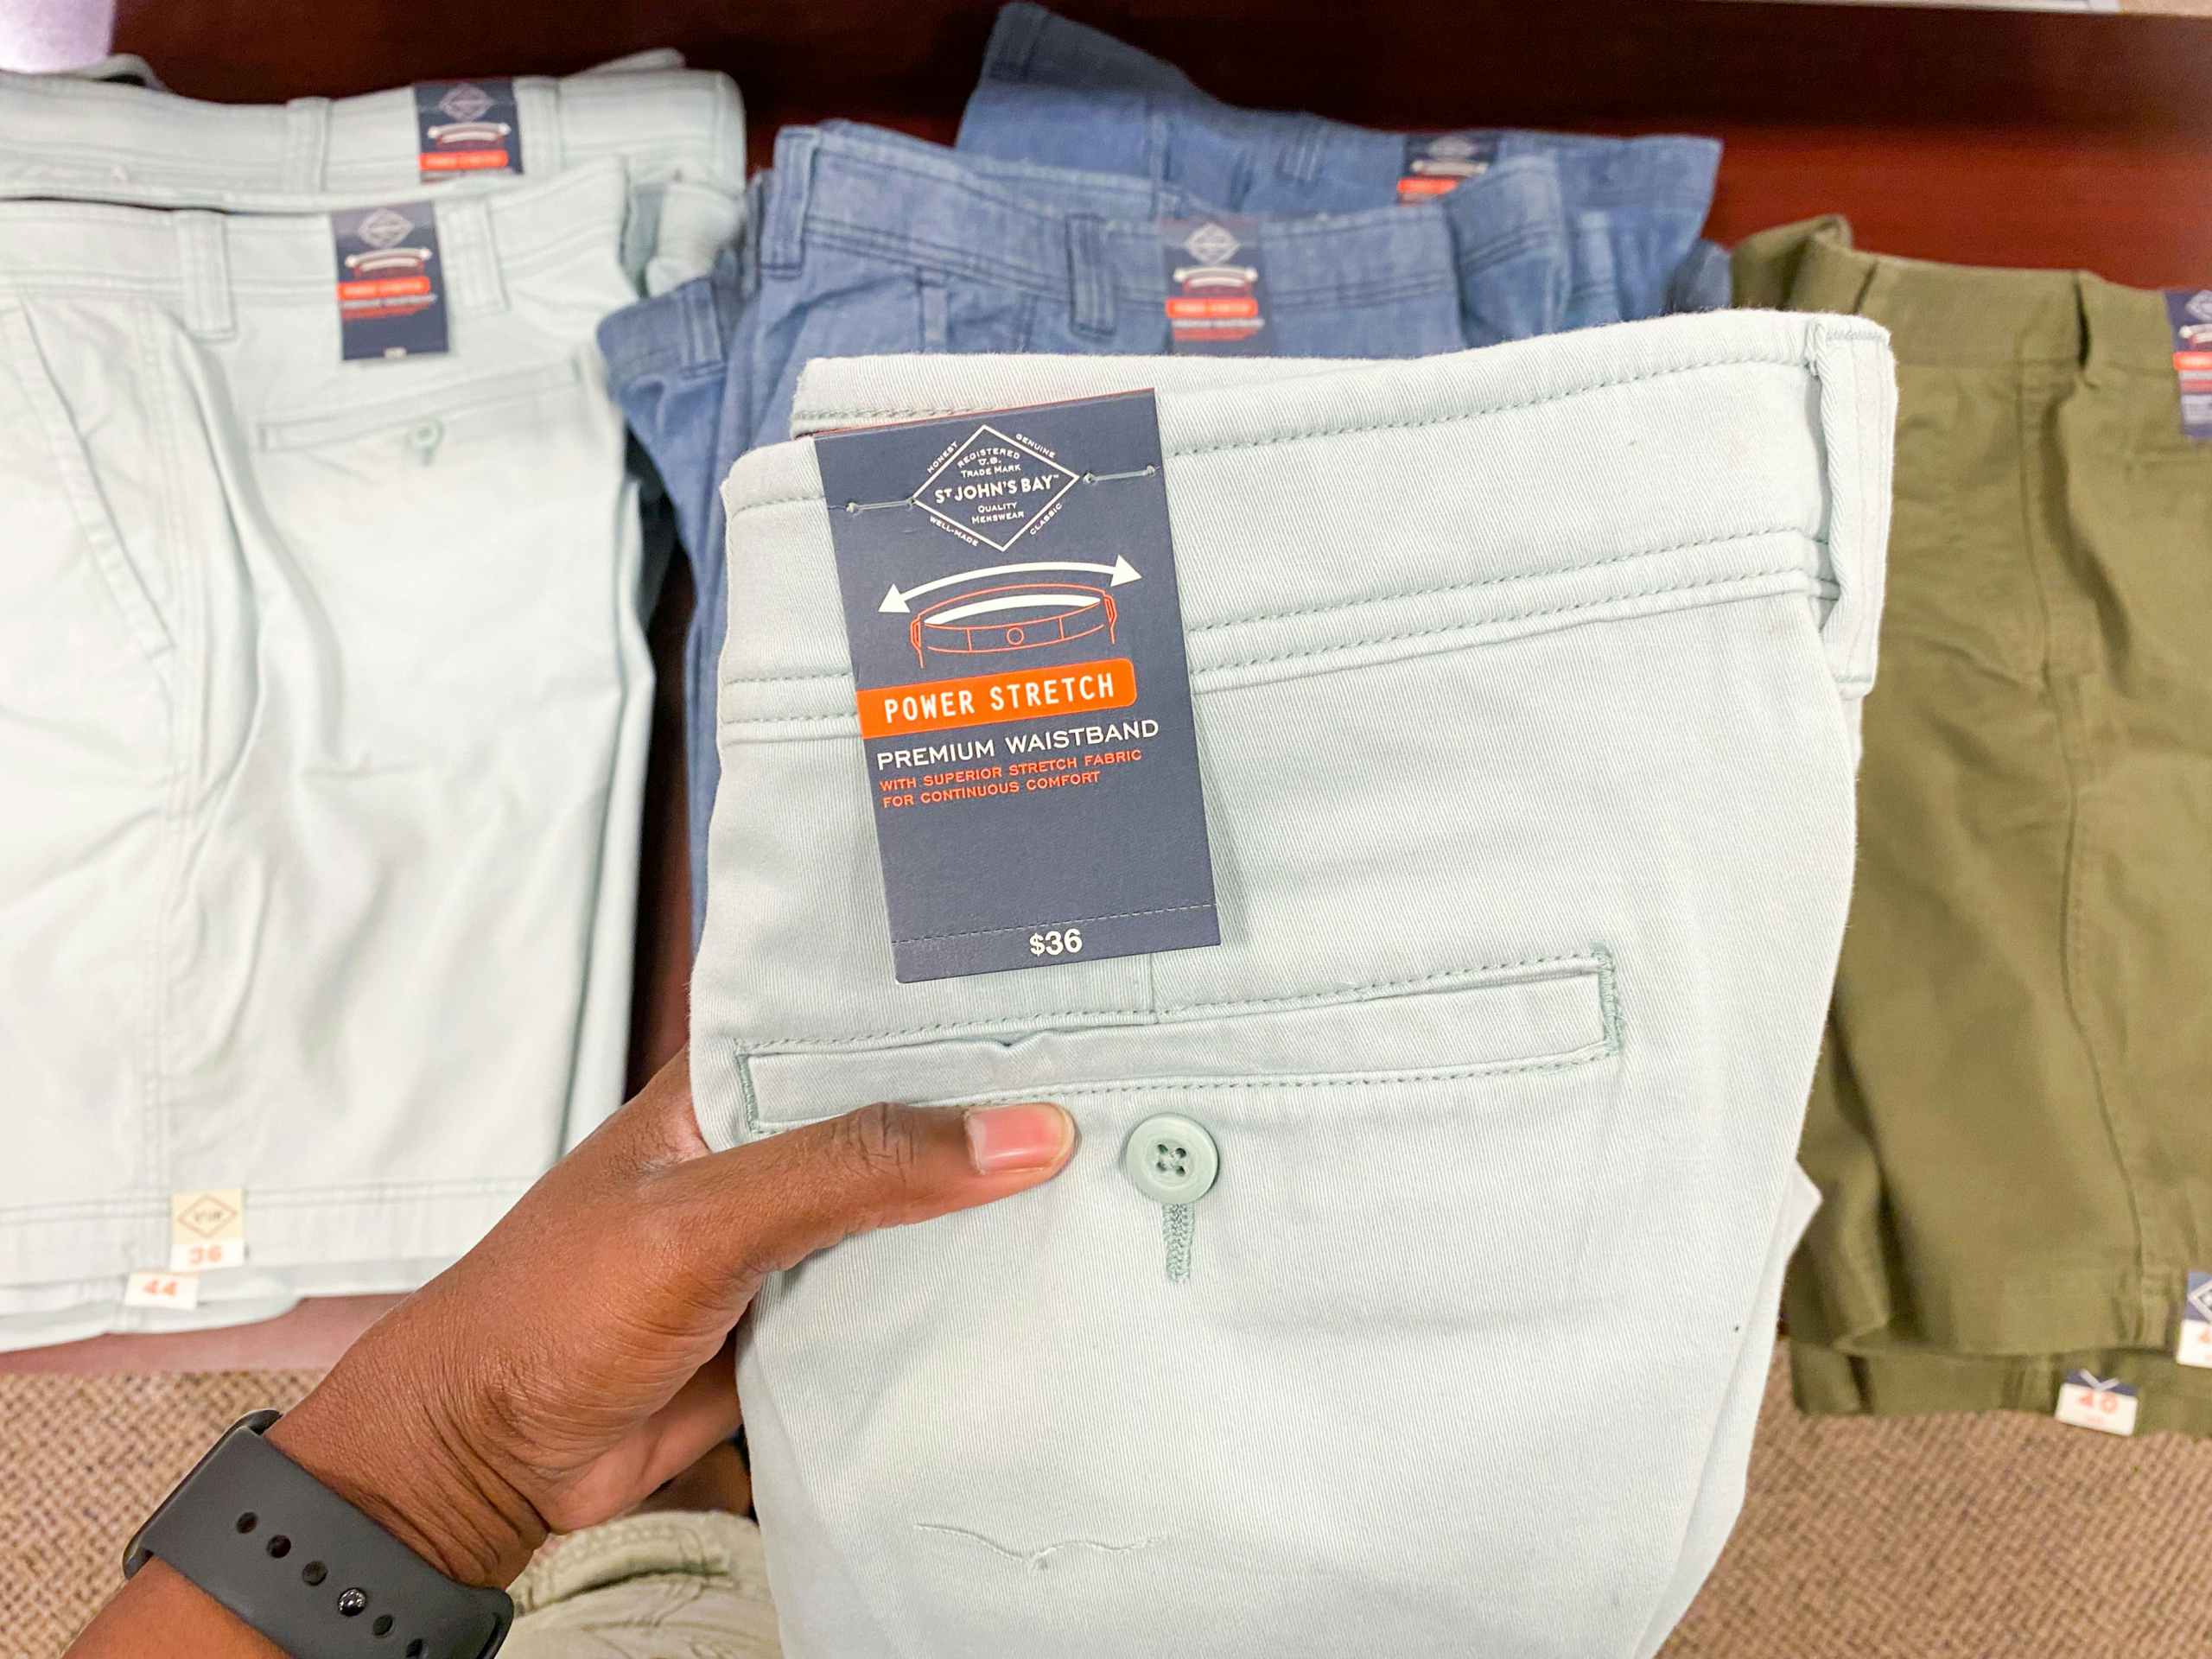 JCPenney Has Women's Shorts as Low as $4.79 and Men's Starting at $11.24